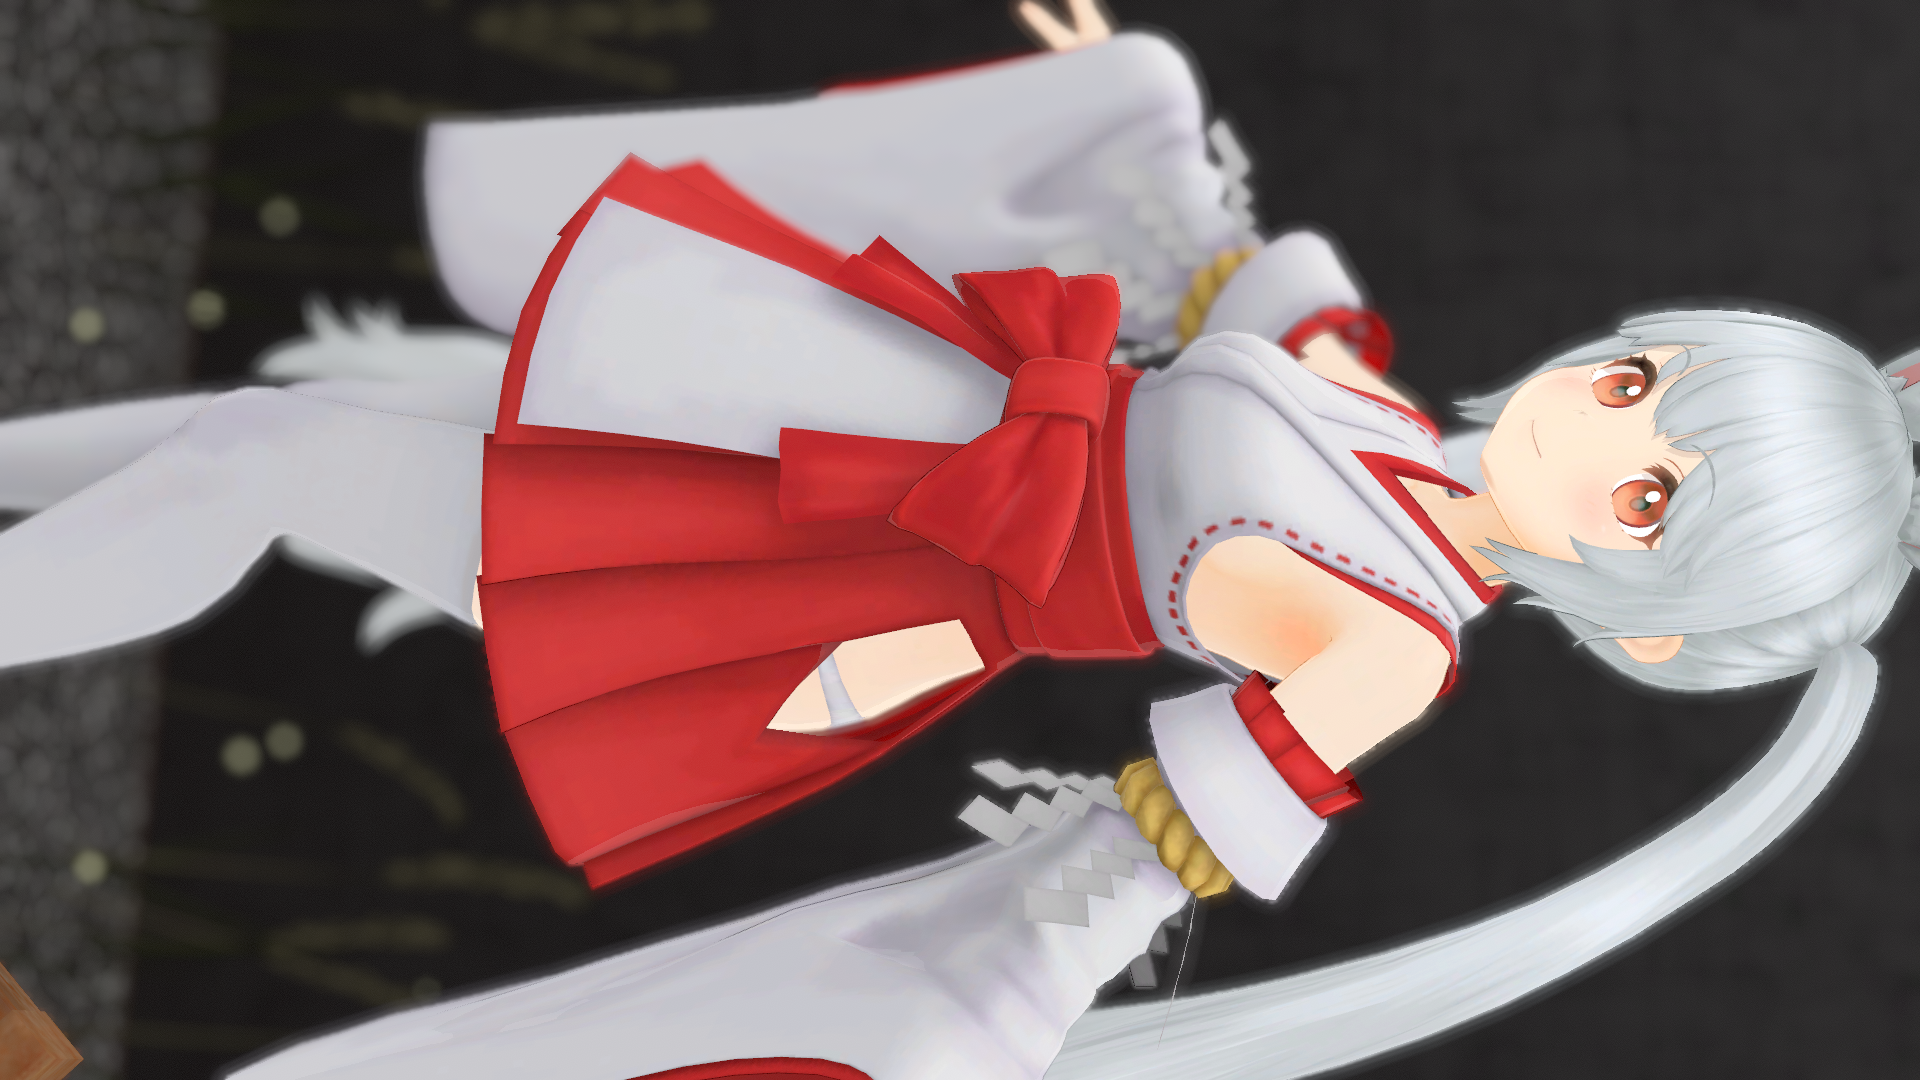 VRChat_1920x1080_2021-12-05_05-30-03.160.png